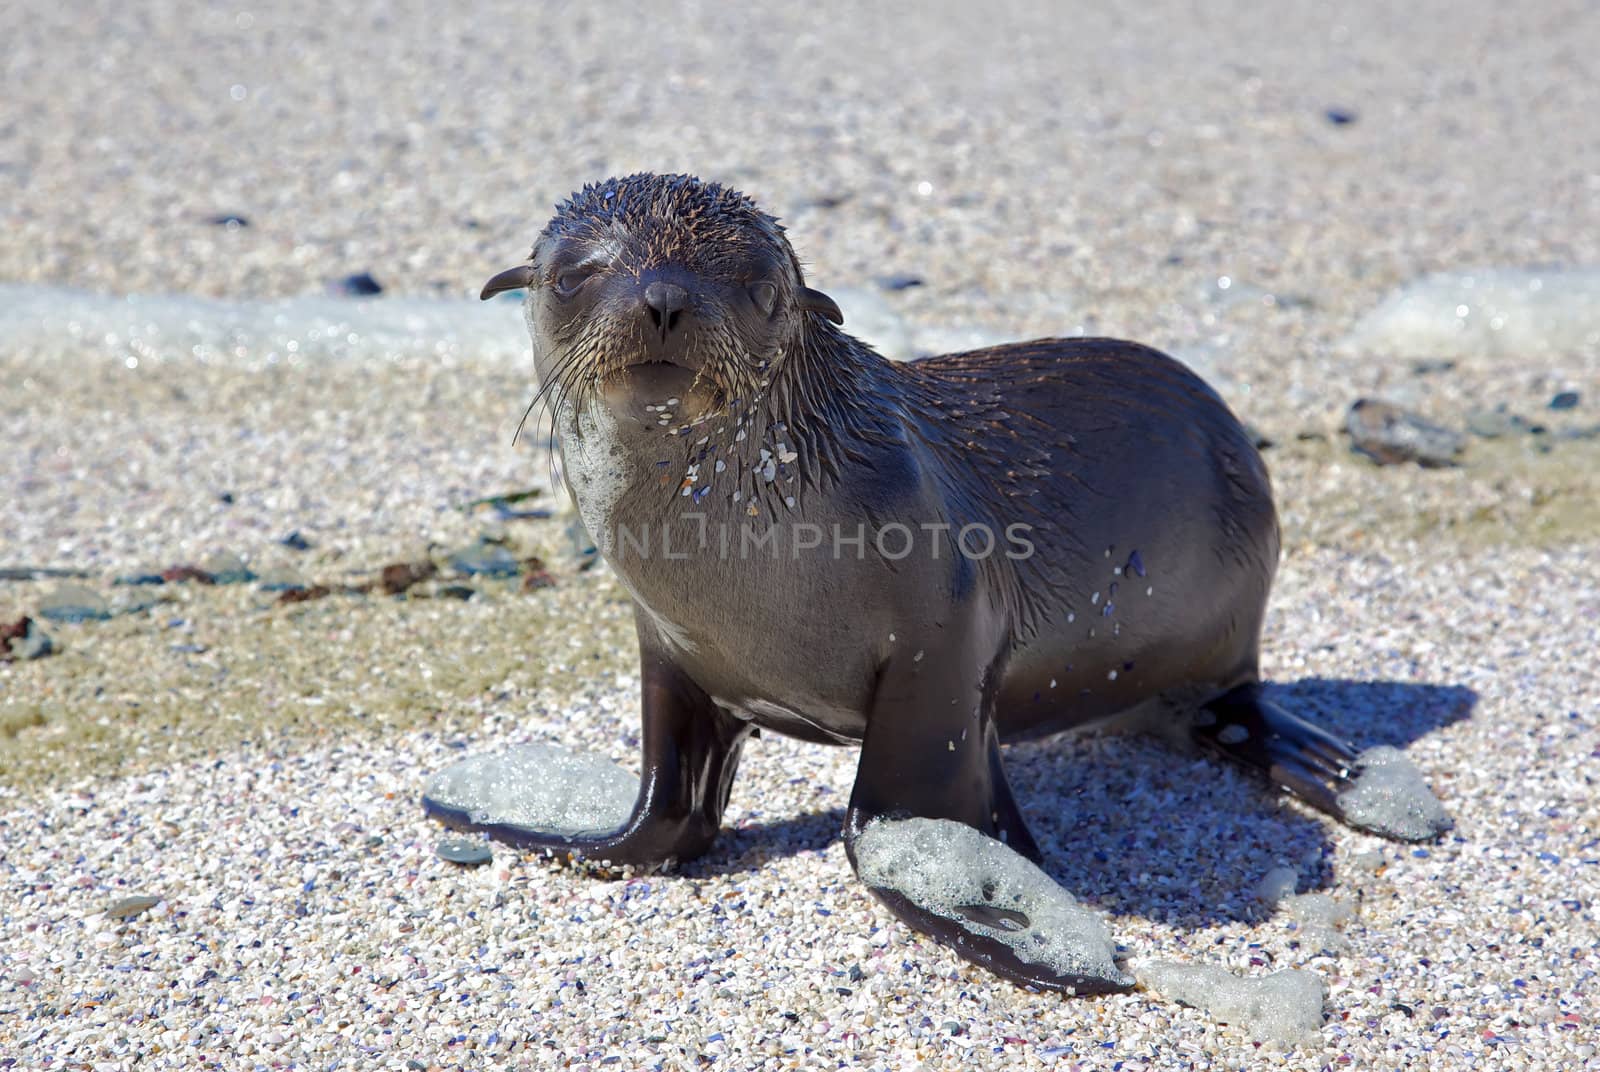 A young Cape Fur Seal (Arctocephalus pusillus) coming ashore on Blouberg Beach, Cape Town, South Africa.